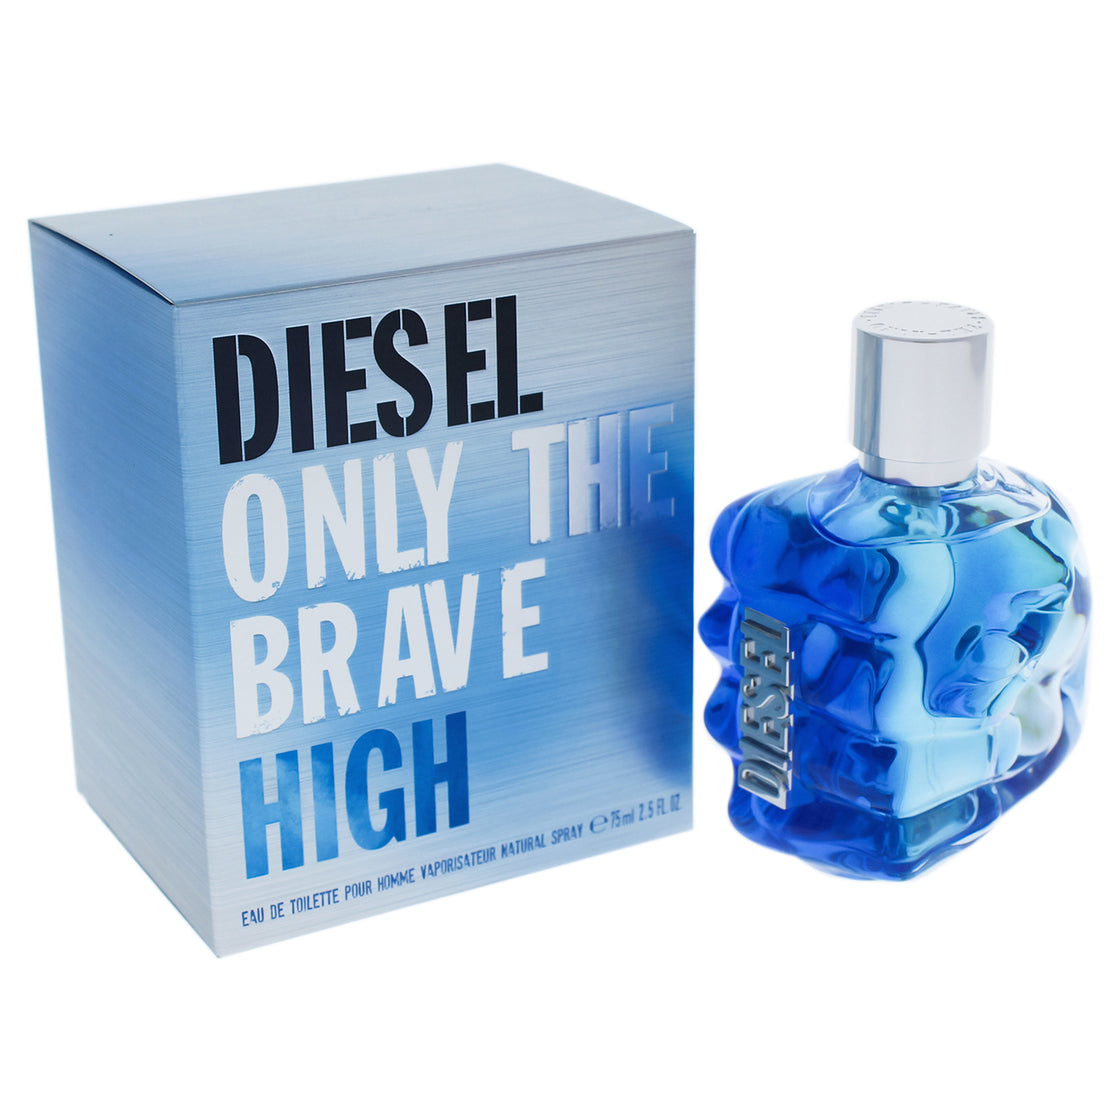 Only The Brave High by Diesel for Men - 2.5 oz EDT Spray